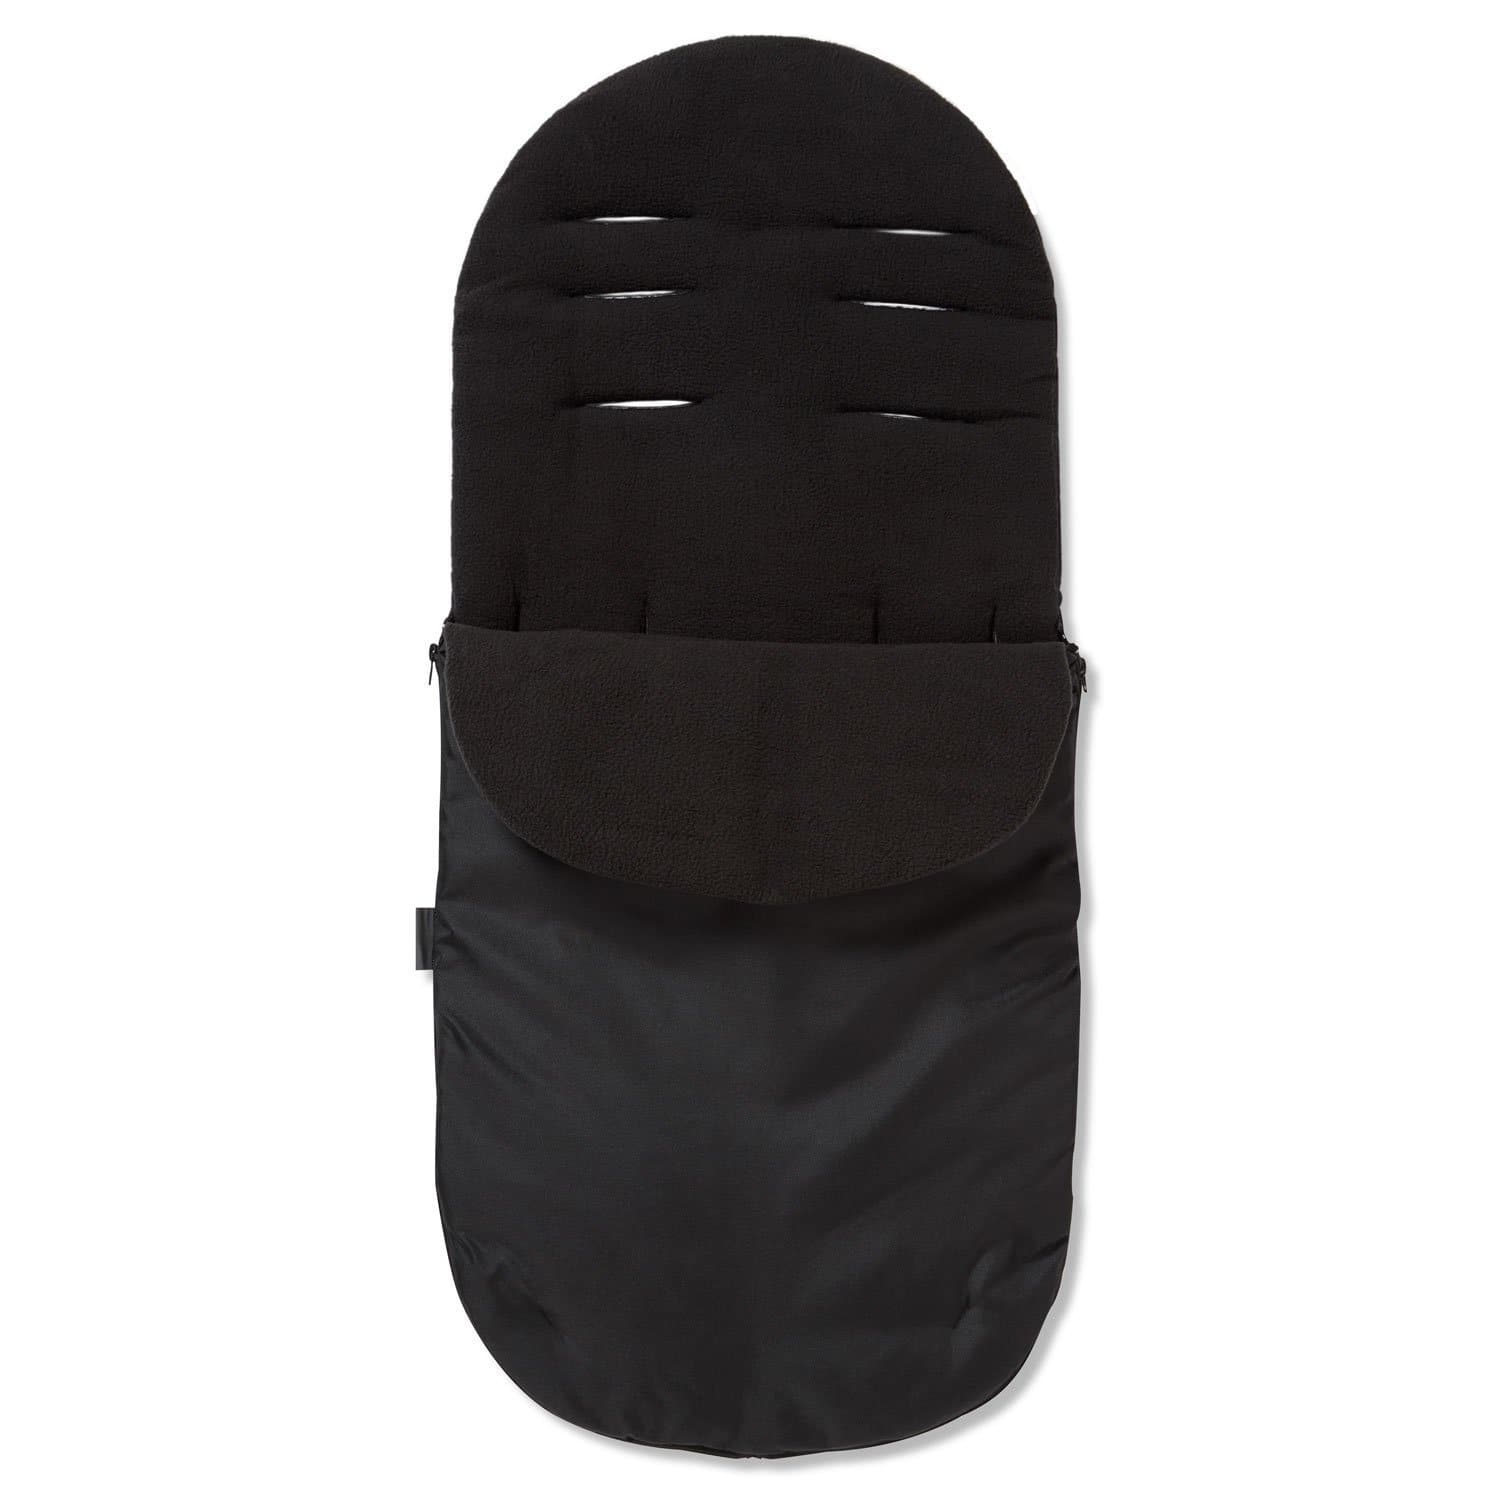 Footmuff / Cosy Toes Compatible with Red Kite - Black / Fits All Models | For Your Little One